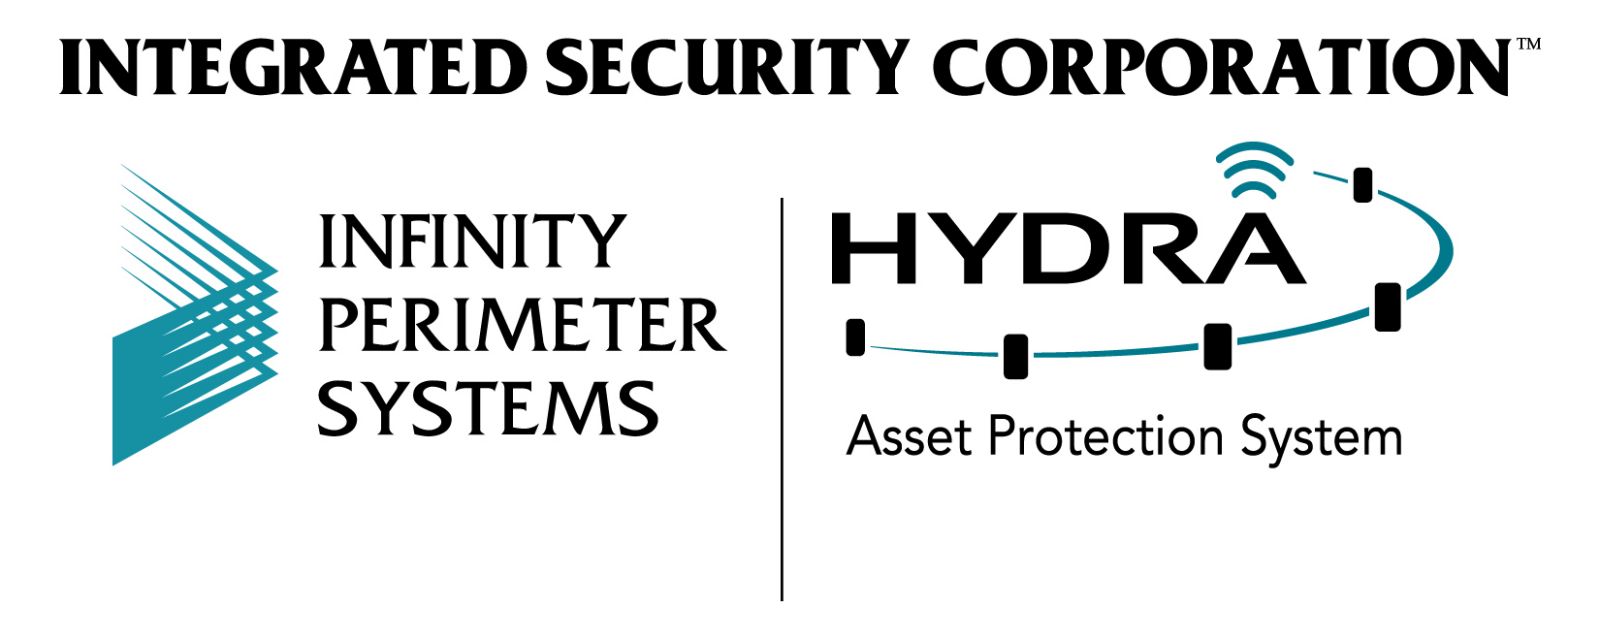 Perimeter Intrusion Detection Systems | Security Fence | Hydra